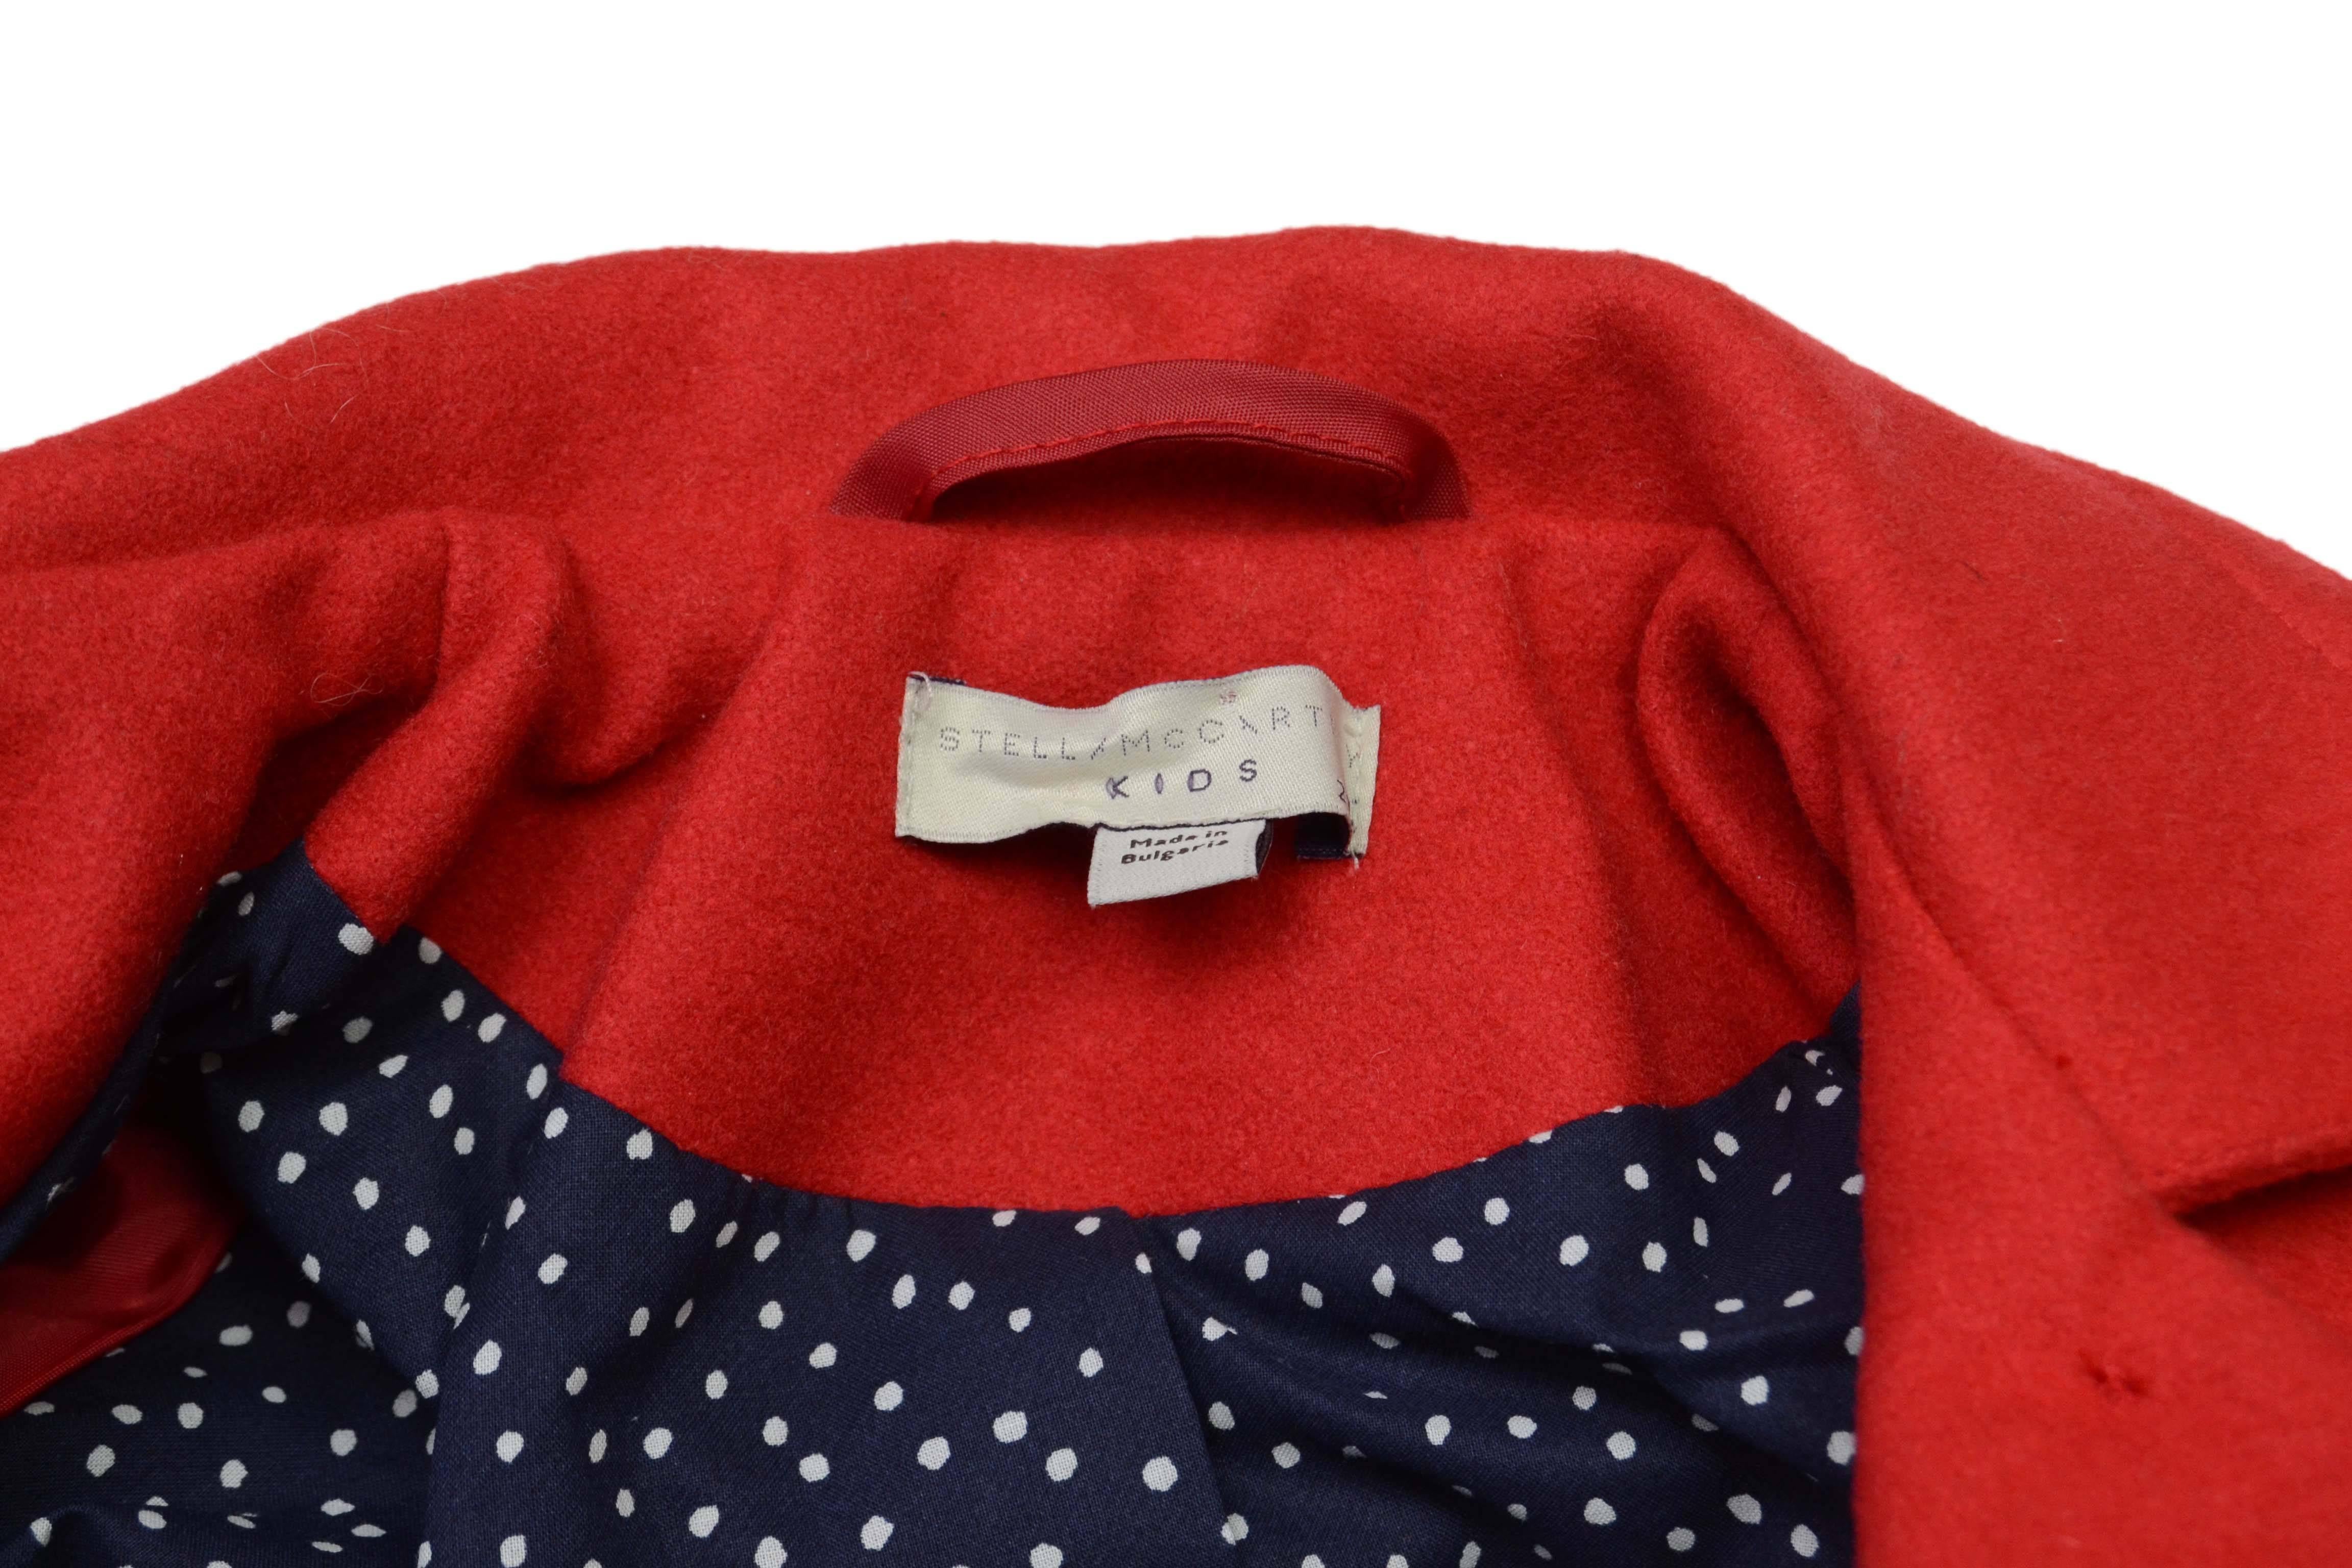 Stella McCartney KIDS Red Wool Coat Year 2 
Features navy and white polka dot printed lining
Made In: Bulgaria
Year of Production: 2012
Color: Red 
Composition: 80% wool, 20% polyamide
Lining: Navy and white polka dot, 100%